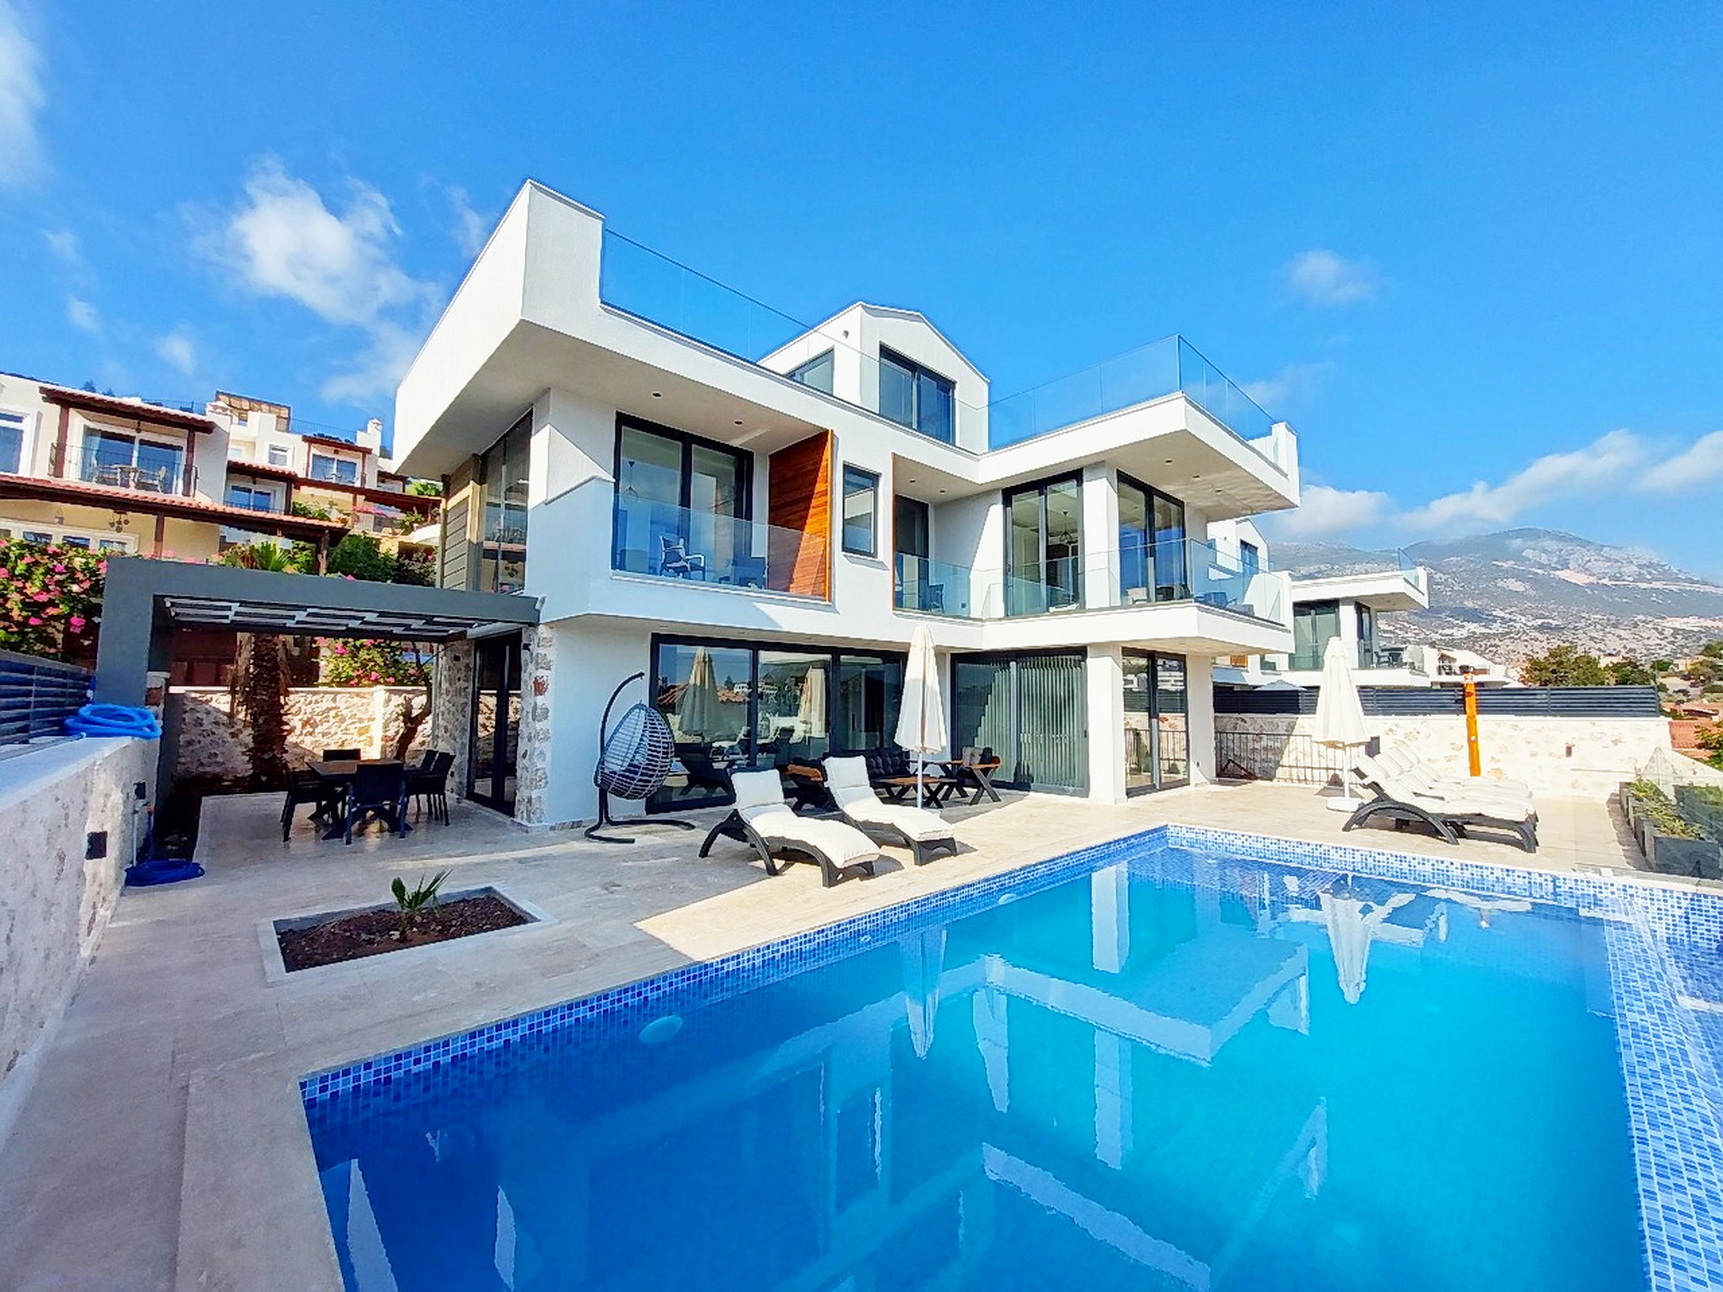 4 Bedroom Luxury Detached Villas with Sea View & Infinity Pool For Sale